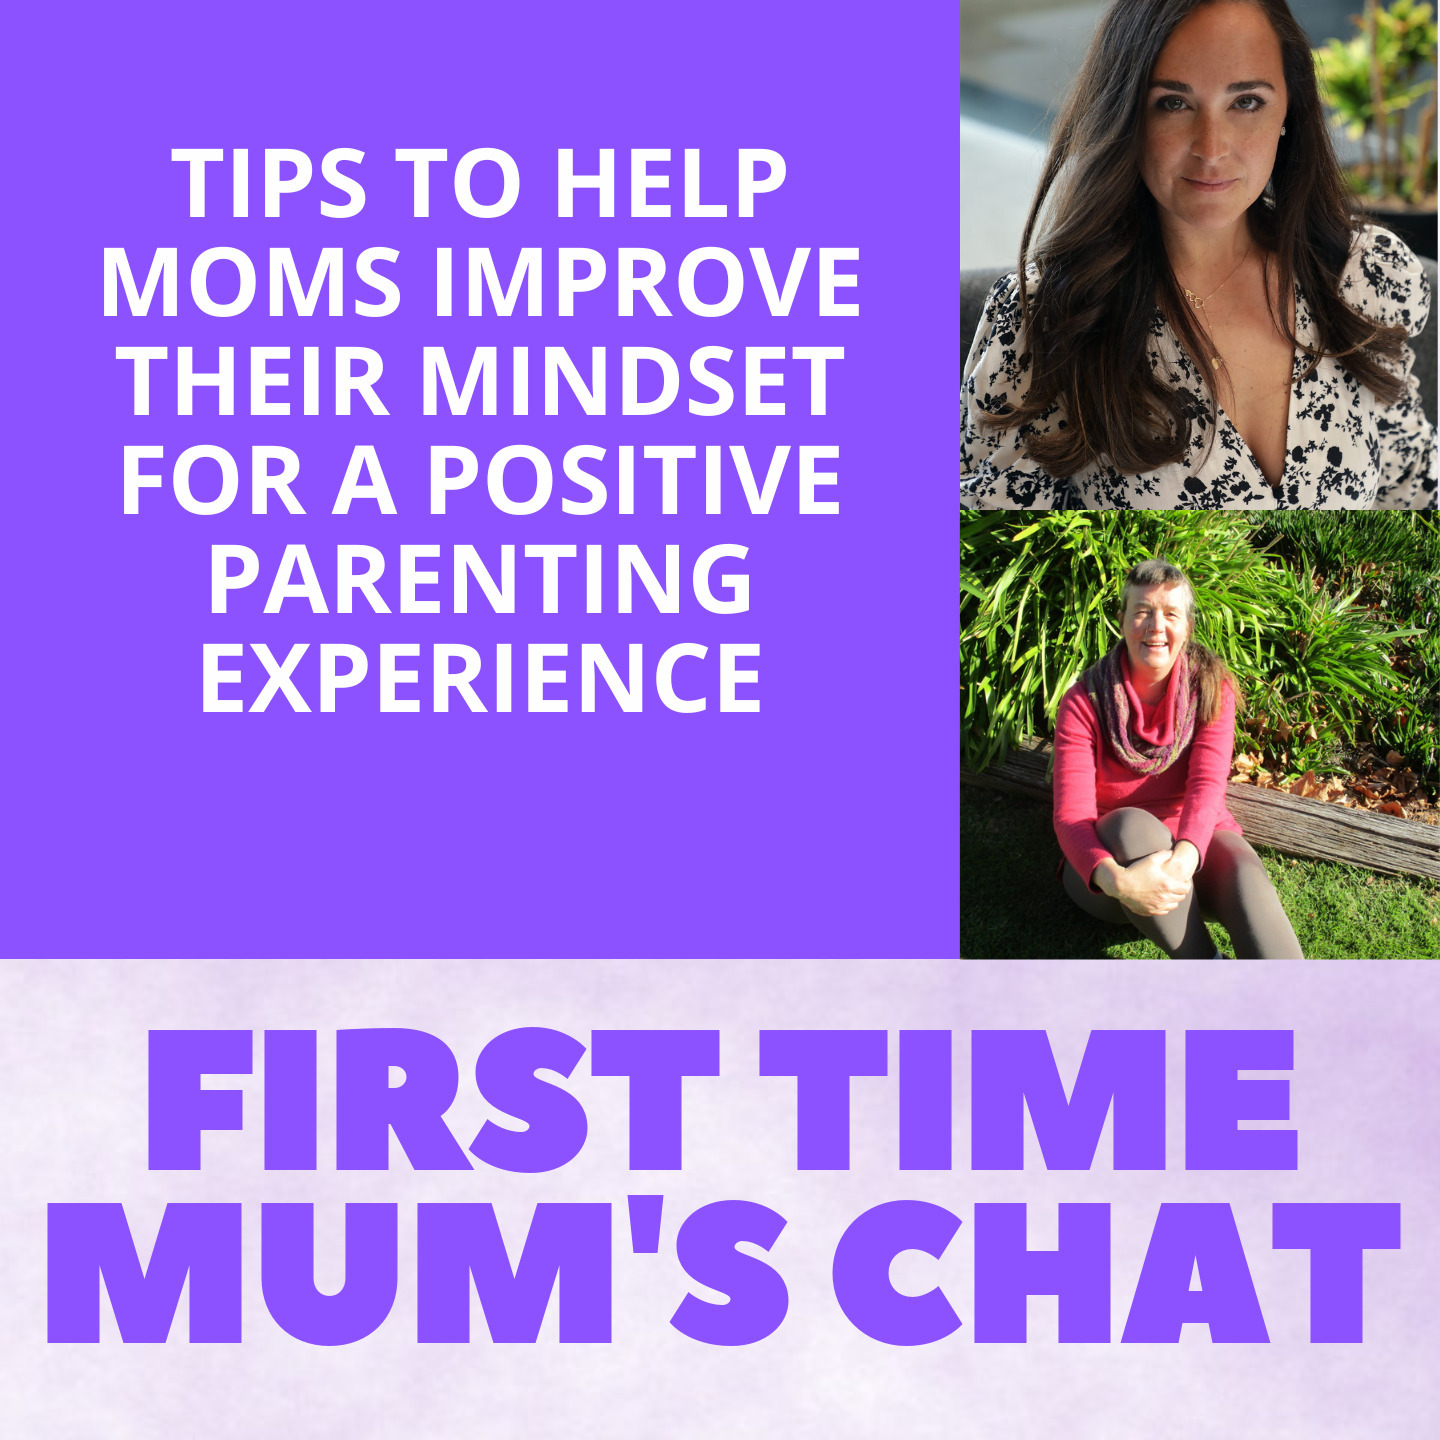 Tips to Help Moms Improve Their Mindset For a Positive Parenting Experience